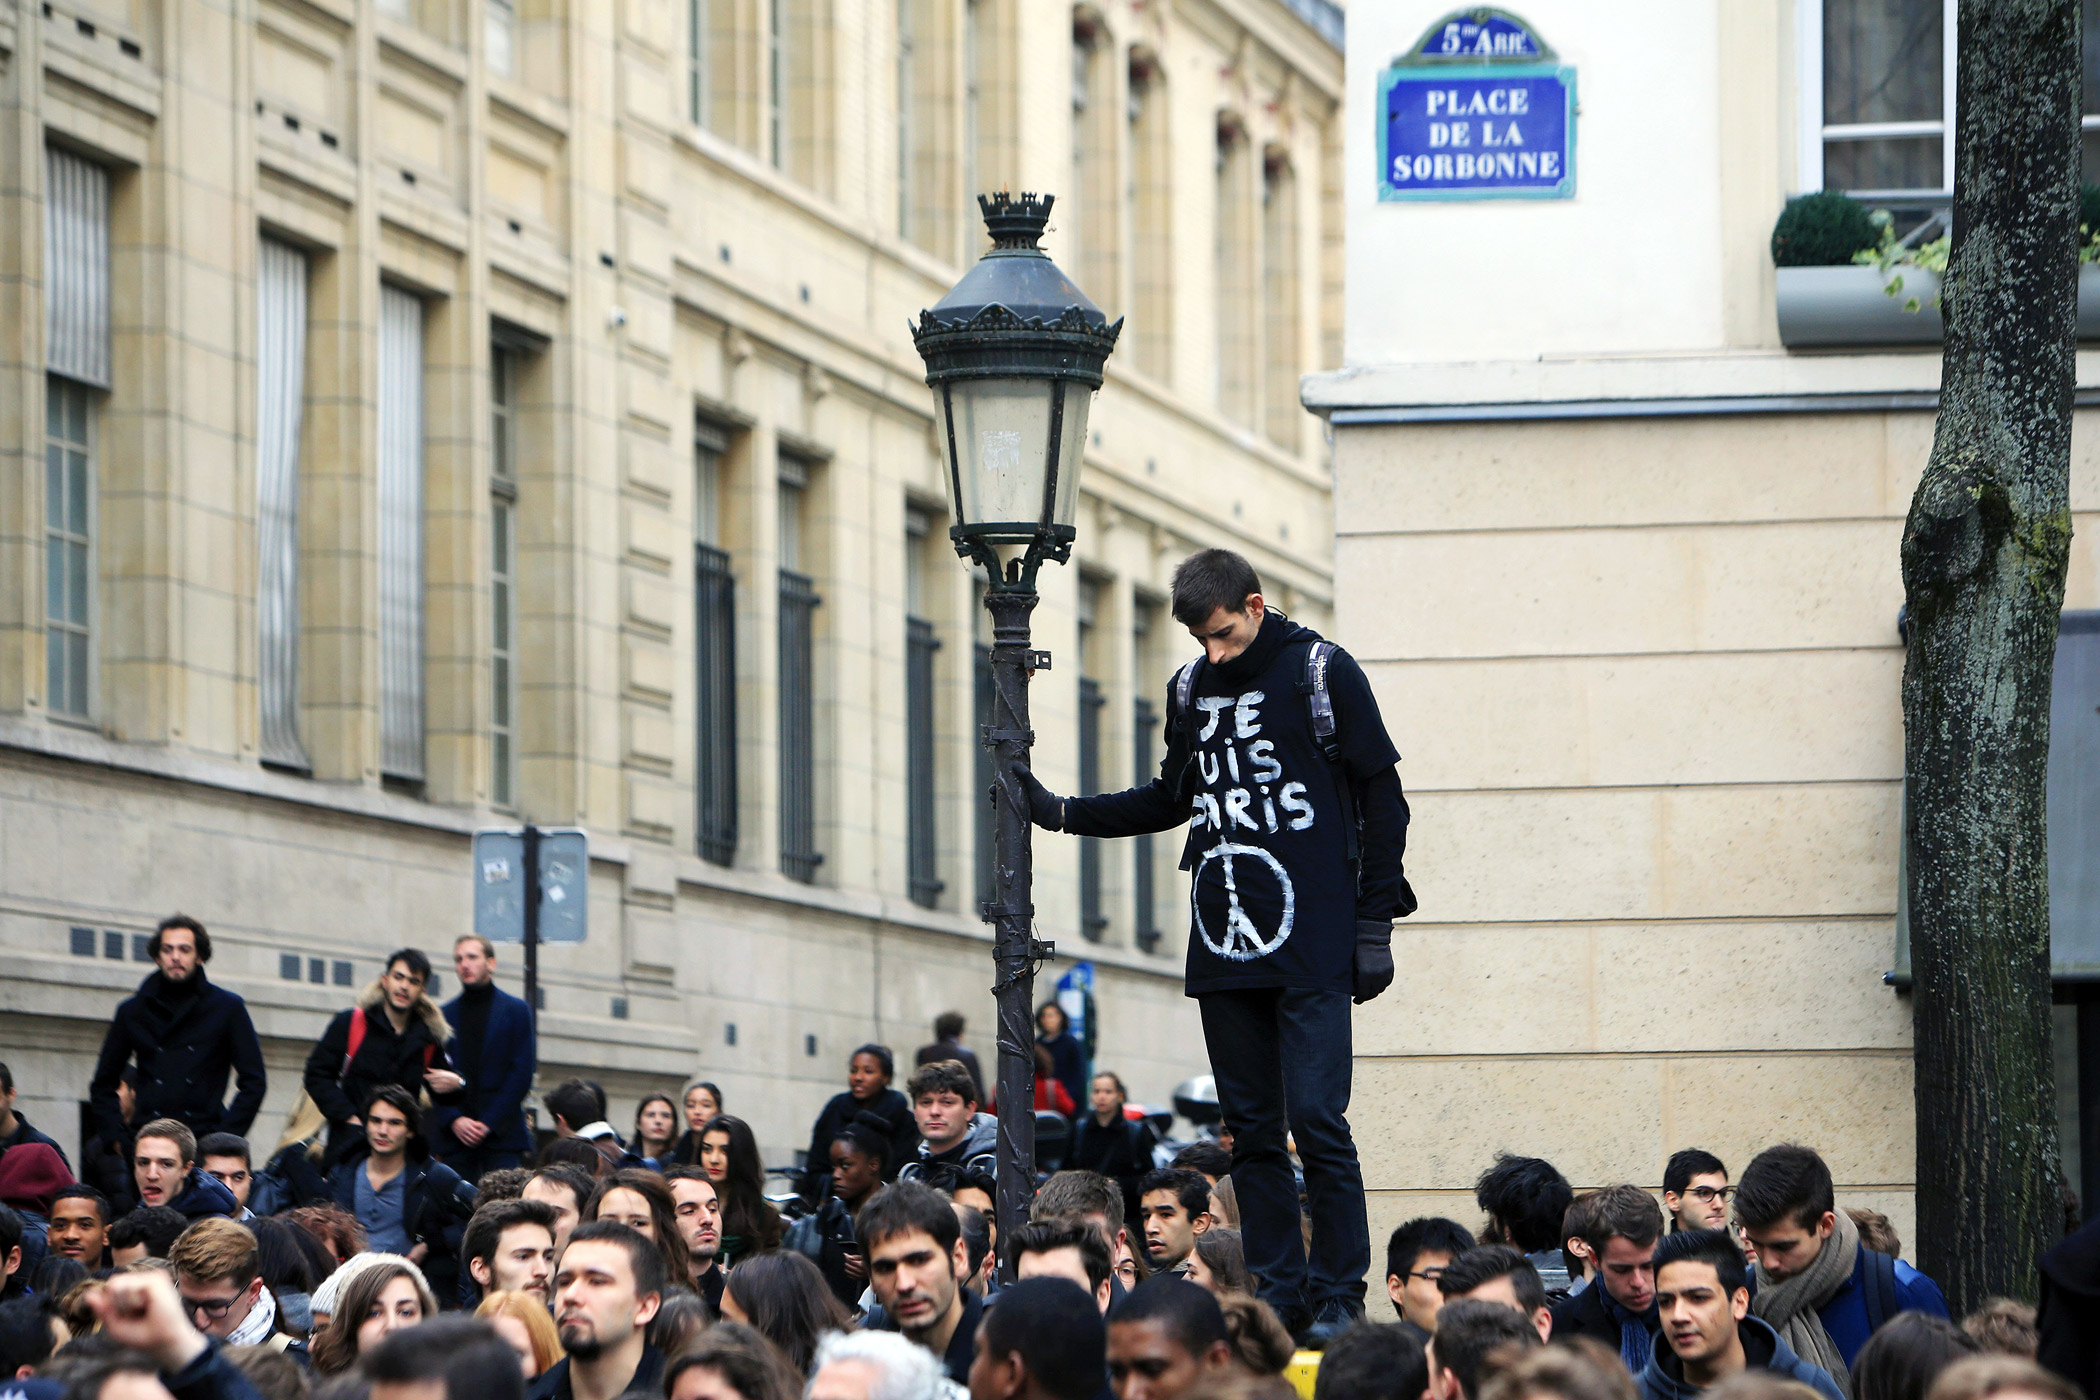 A man wears a shirt that says "I am Paris" during a minute of silence, outside the Sorbonne University.